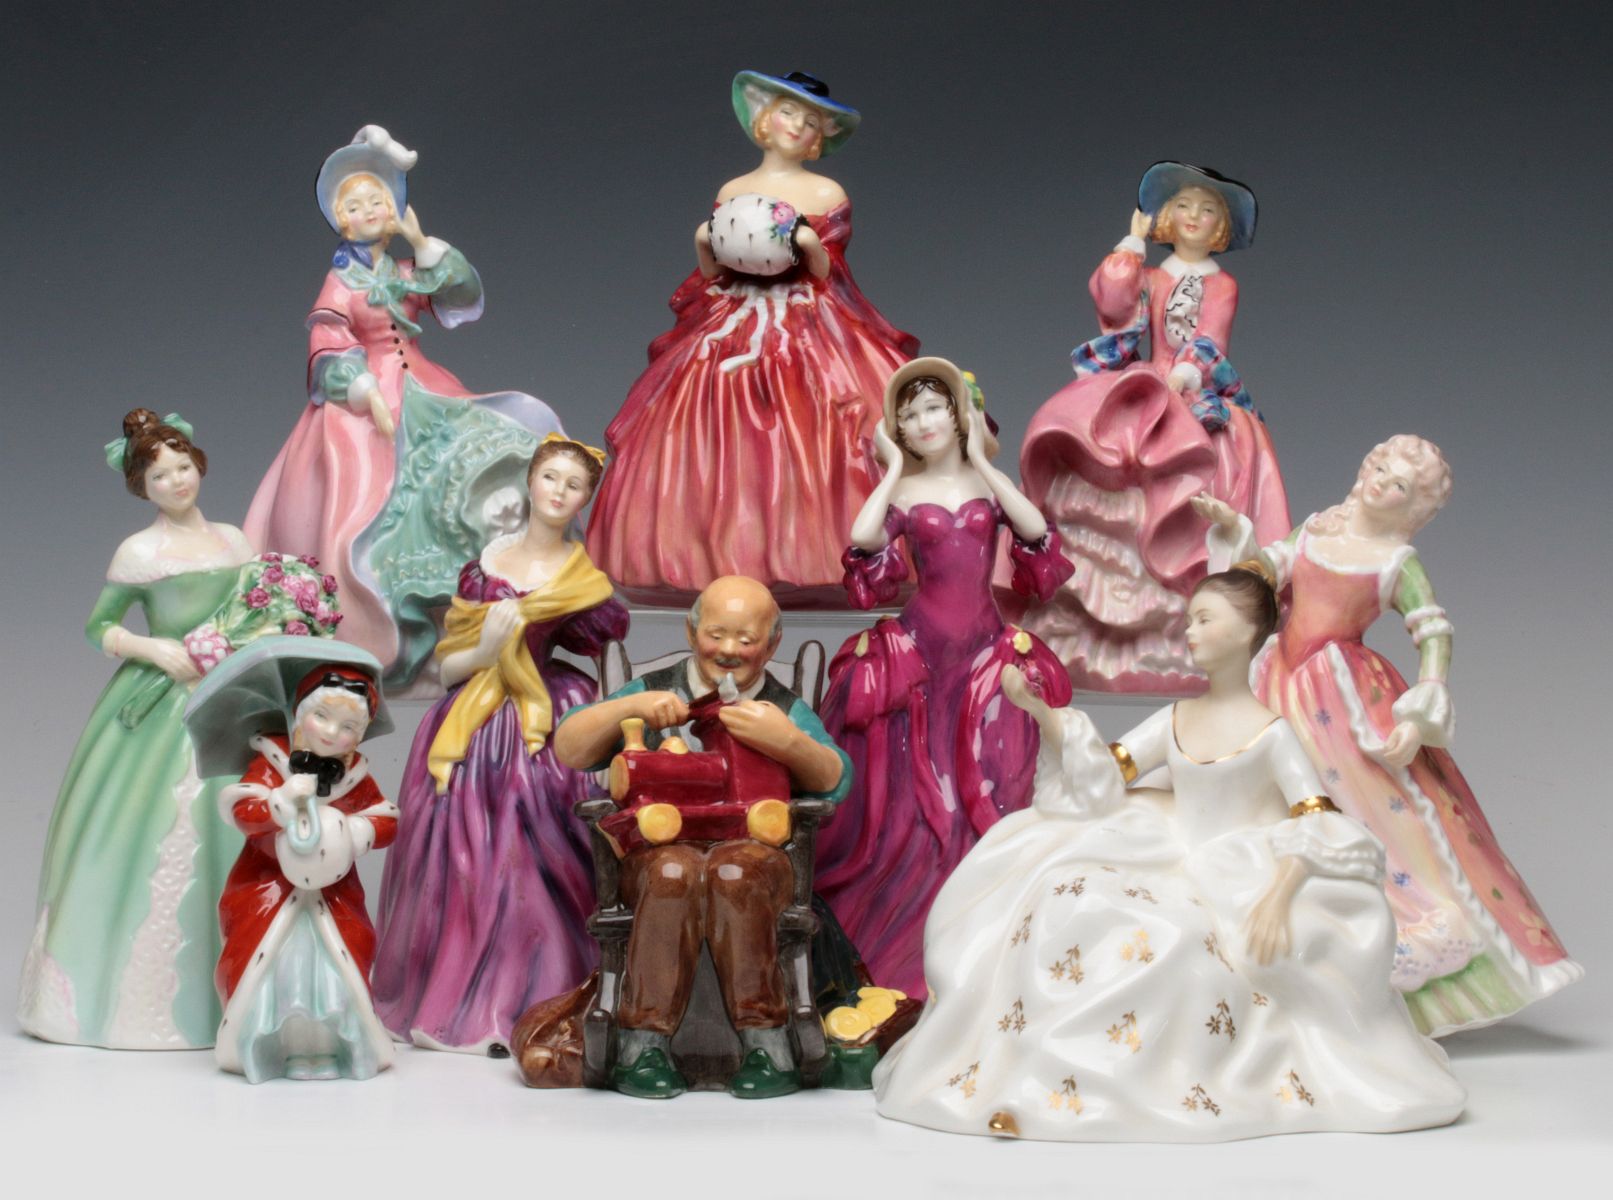 TEN ROYAL DOULTON FIGURINES INCLUDING THE TOYMAKER